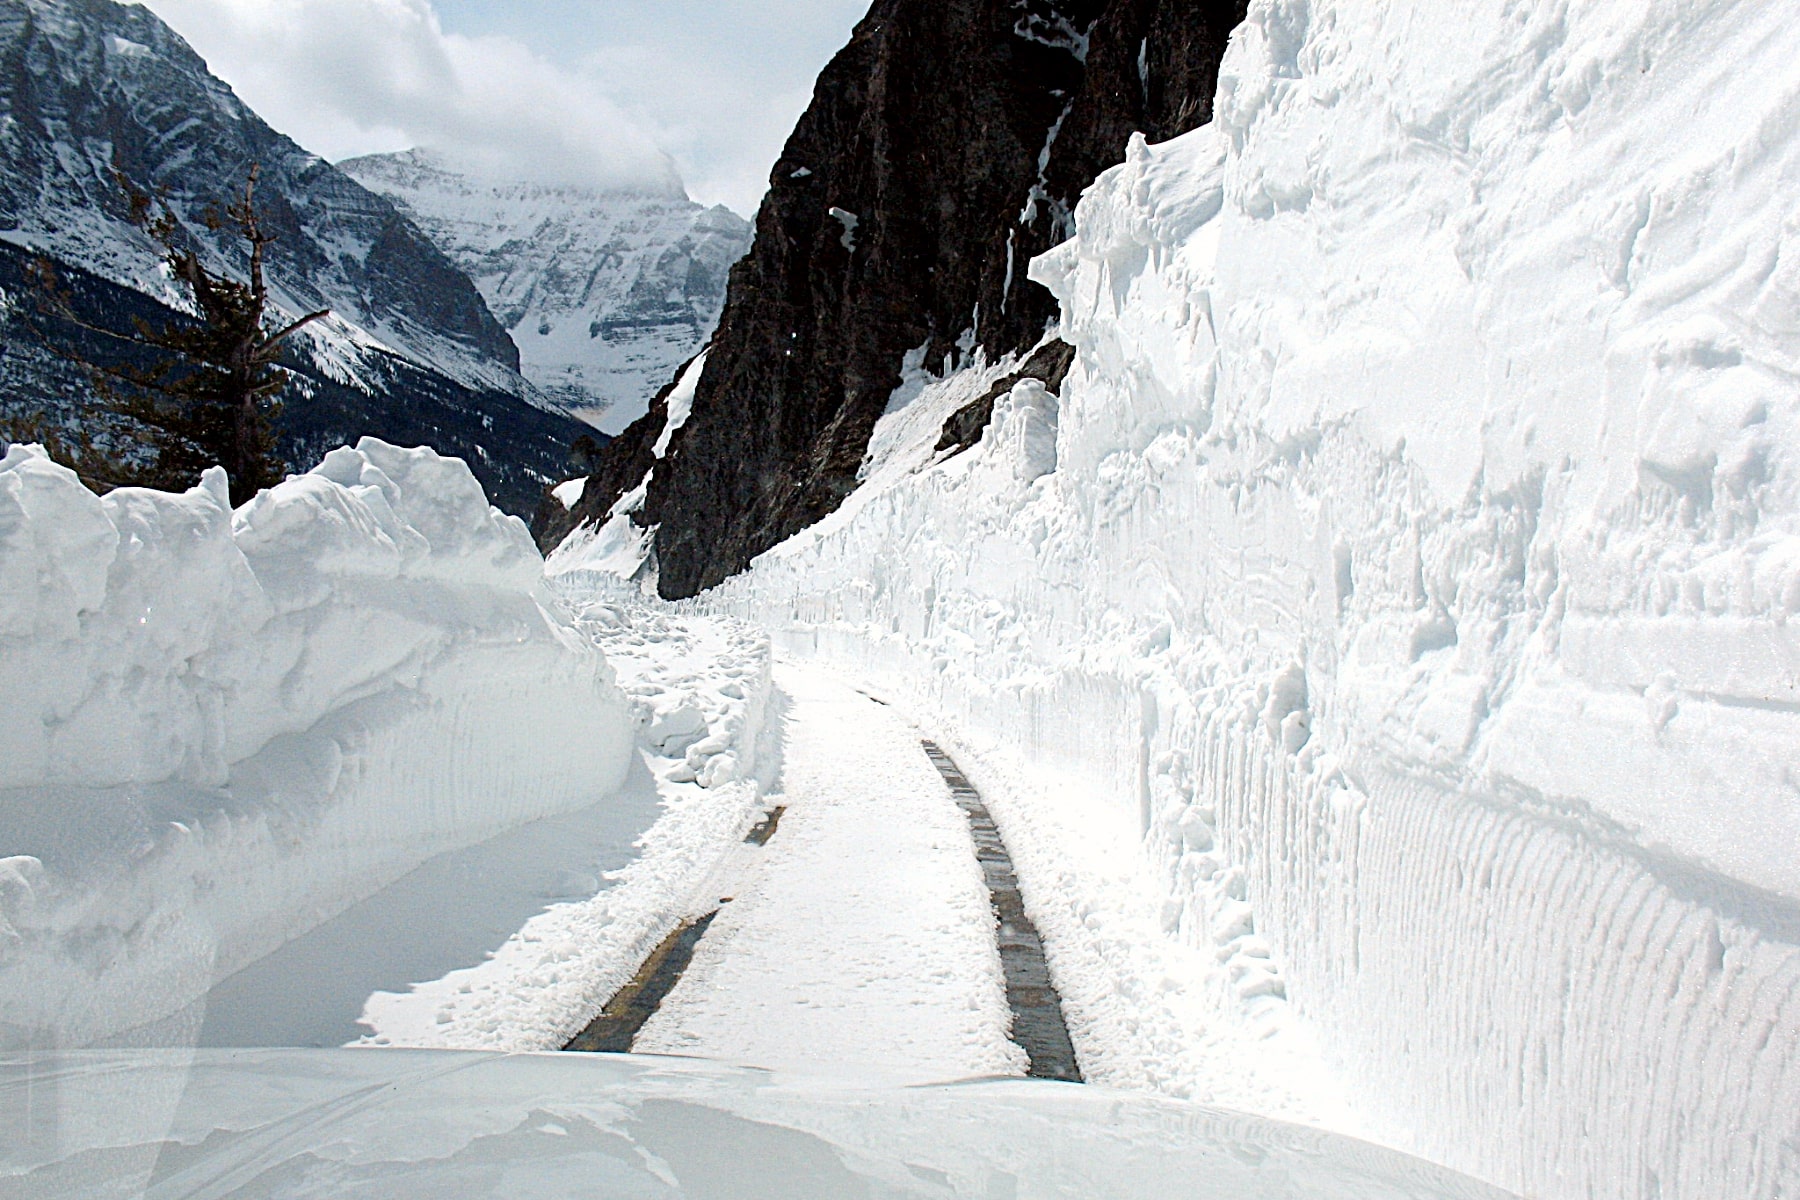 A towering wall of snow on both sides of Going to the Sun Road in Glacier National Park